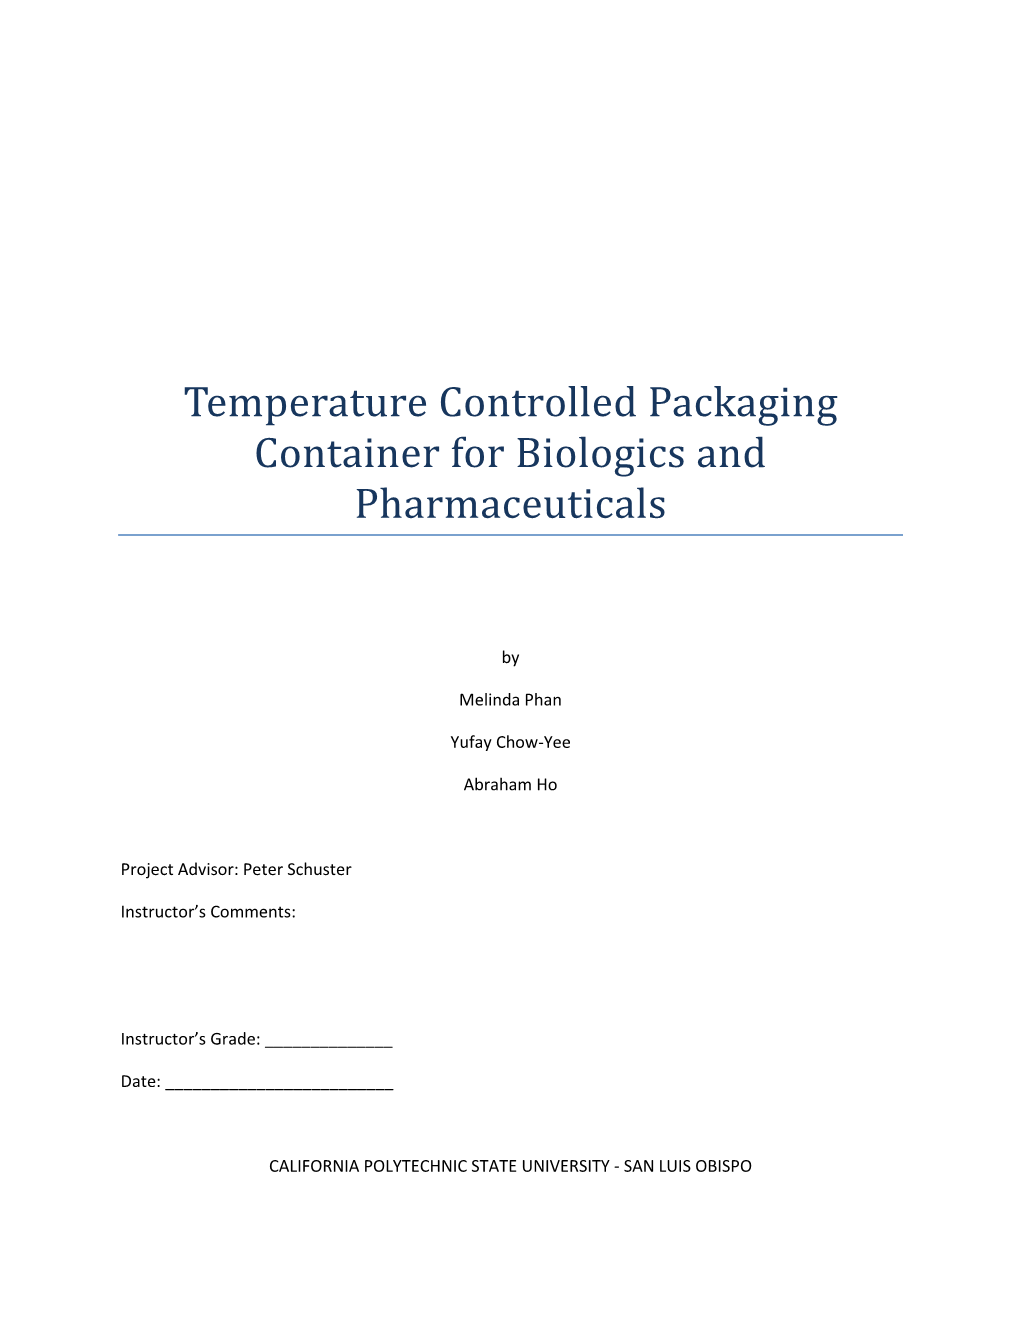 Temperature Controlled Packaging Container for Biologics and Pharmaceuticals